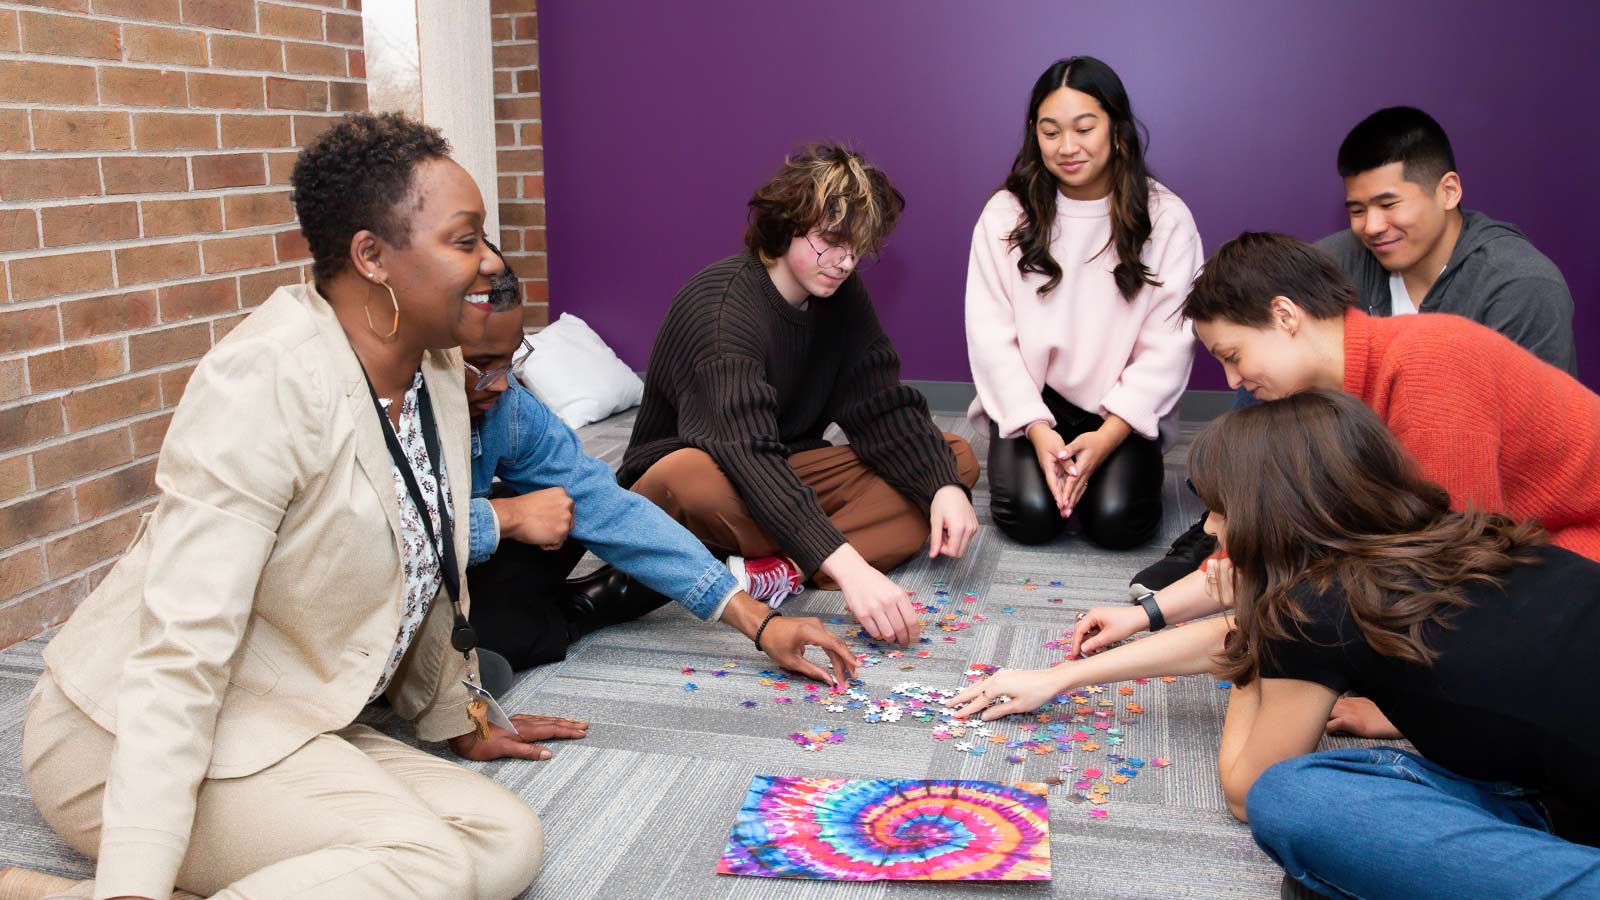 A group of diverse individuals sitting on the floor, engaging in a collaborative puzzle activity.